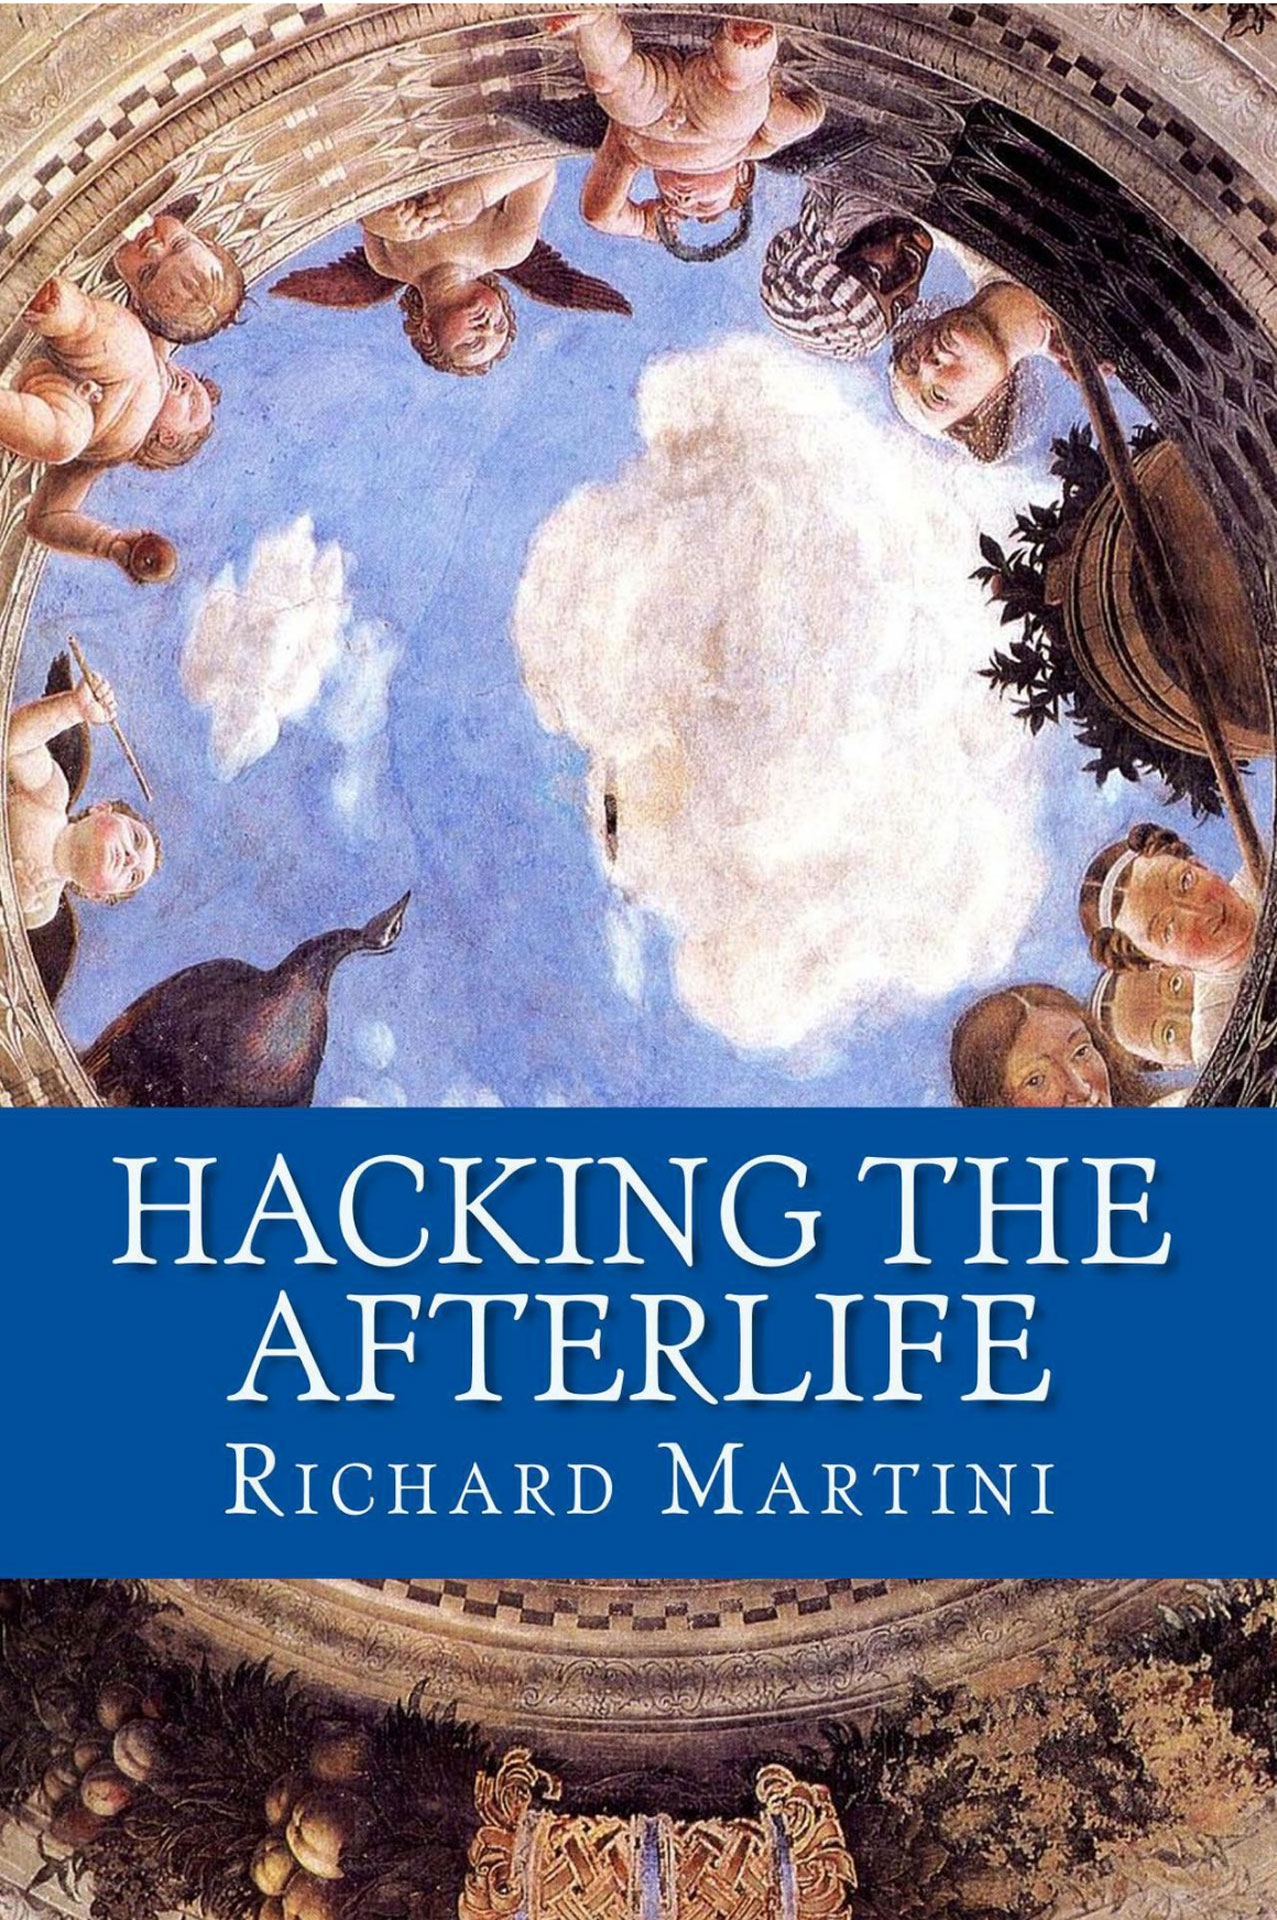 "Everyone who has ever lived continues to exist on the Flipside and if possible, can be asked direct questions." This is the startling premise of "Hacking the Afterlife" which argues it's possible to obtain "new information" from people no longer on the planet. These "afterlife interviews" are conducted via various mediums, with people under deep hypnosis, or with people fully conscious yet able to access and remember details of previous lifetimes. The reports offer practical advice ("afterlife hacks") on how to navigate our lives and improve our planet.